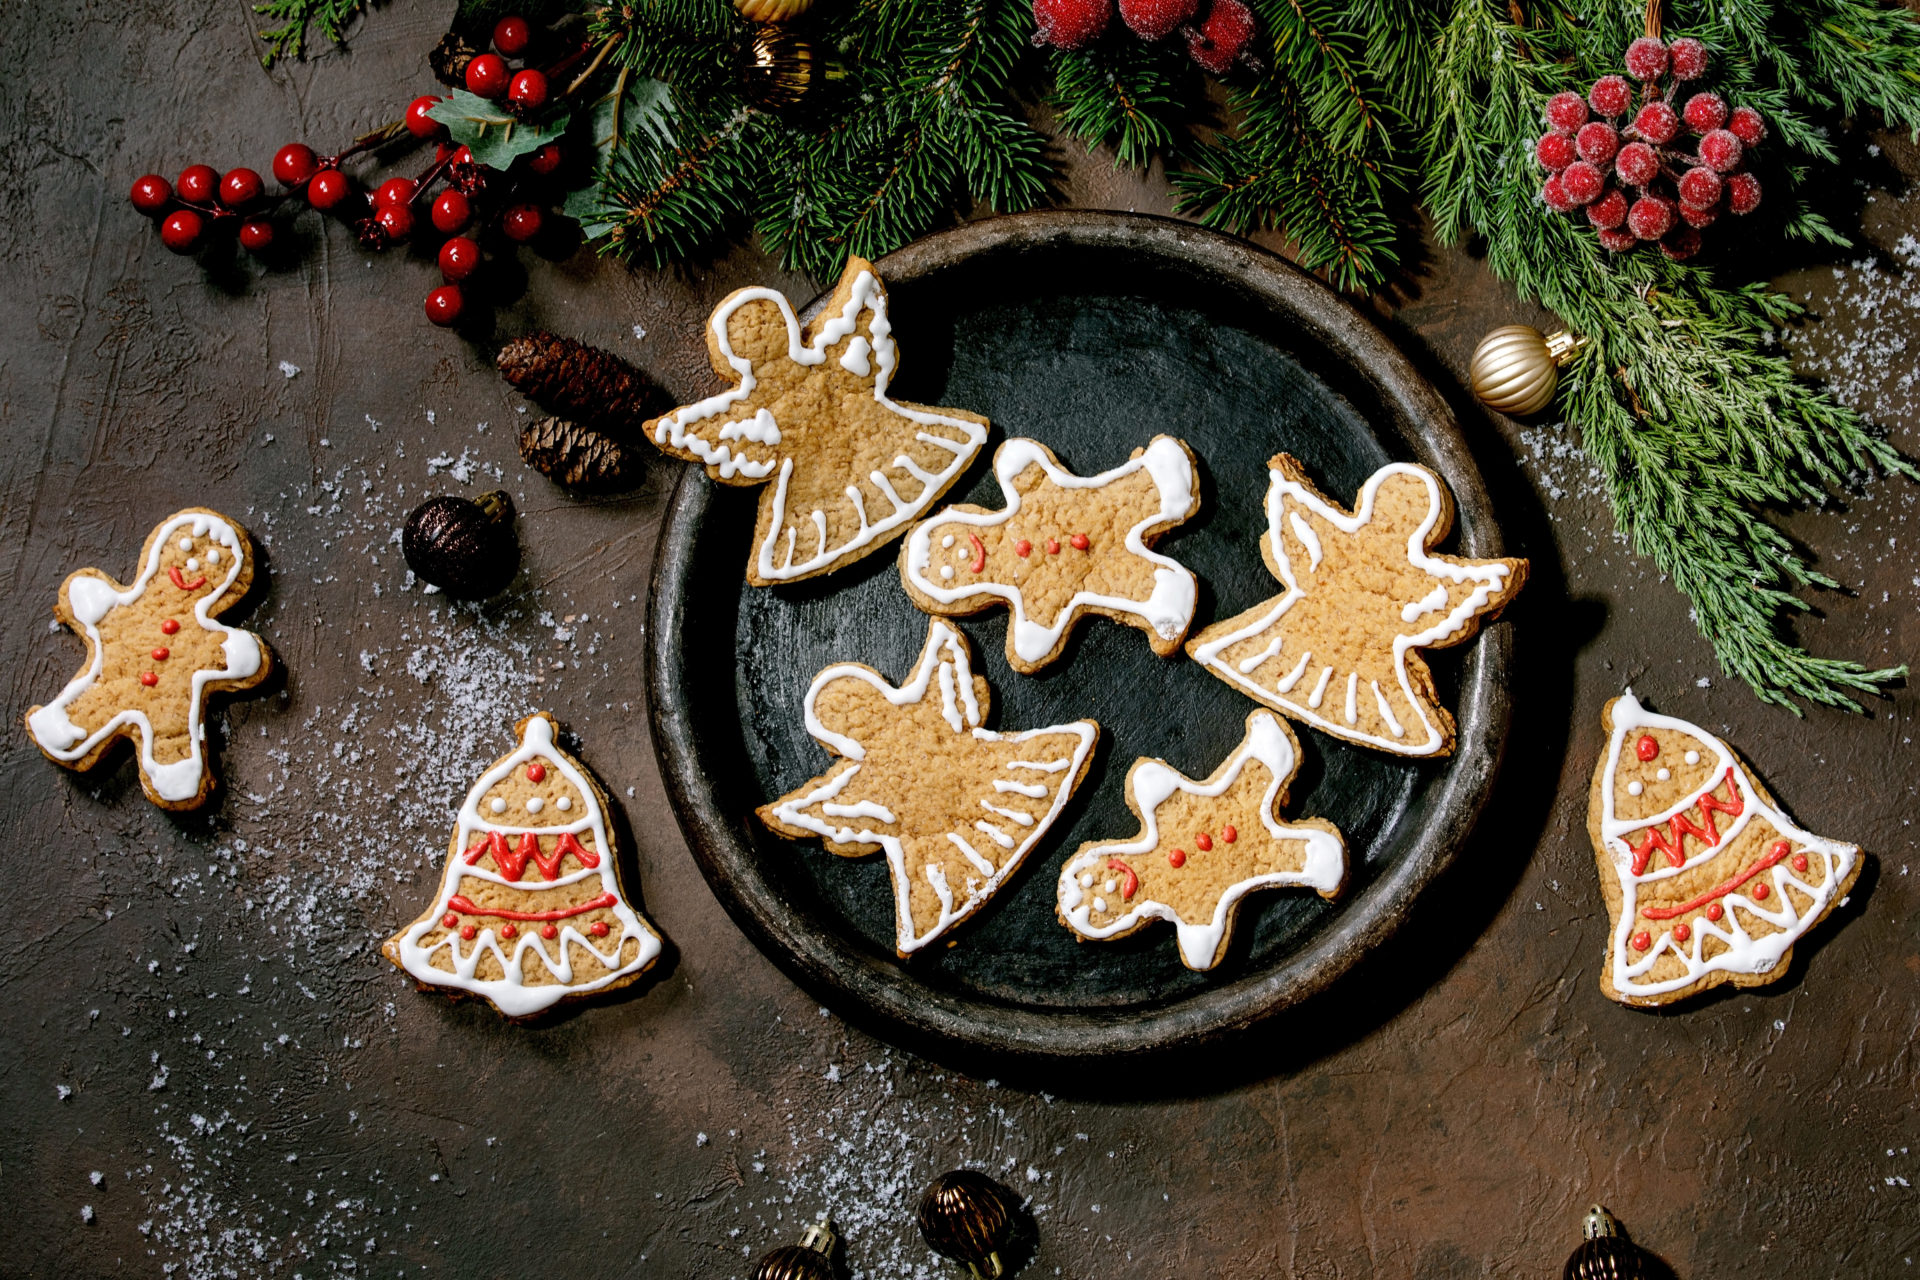 Homemade traditional Christmas gingerbread cookies with icing ornate. Gingerbread Man. angel. bell on ceramic plate with xmas decorations over dark background. Flat lay